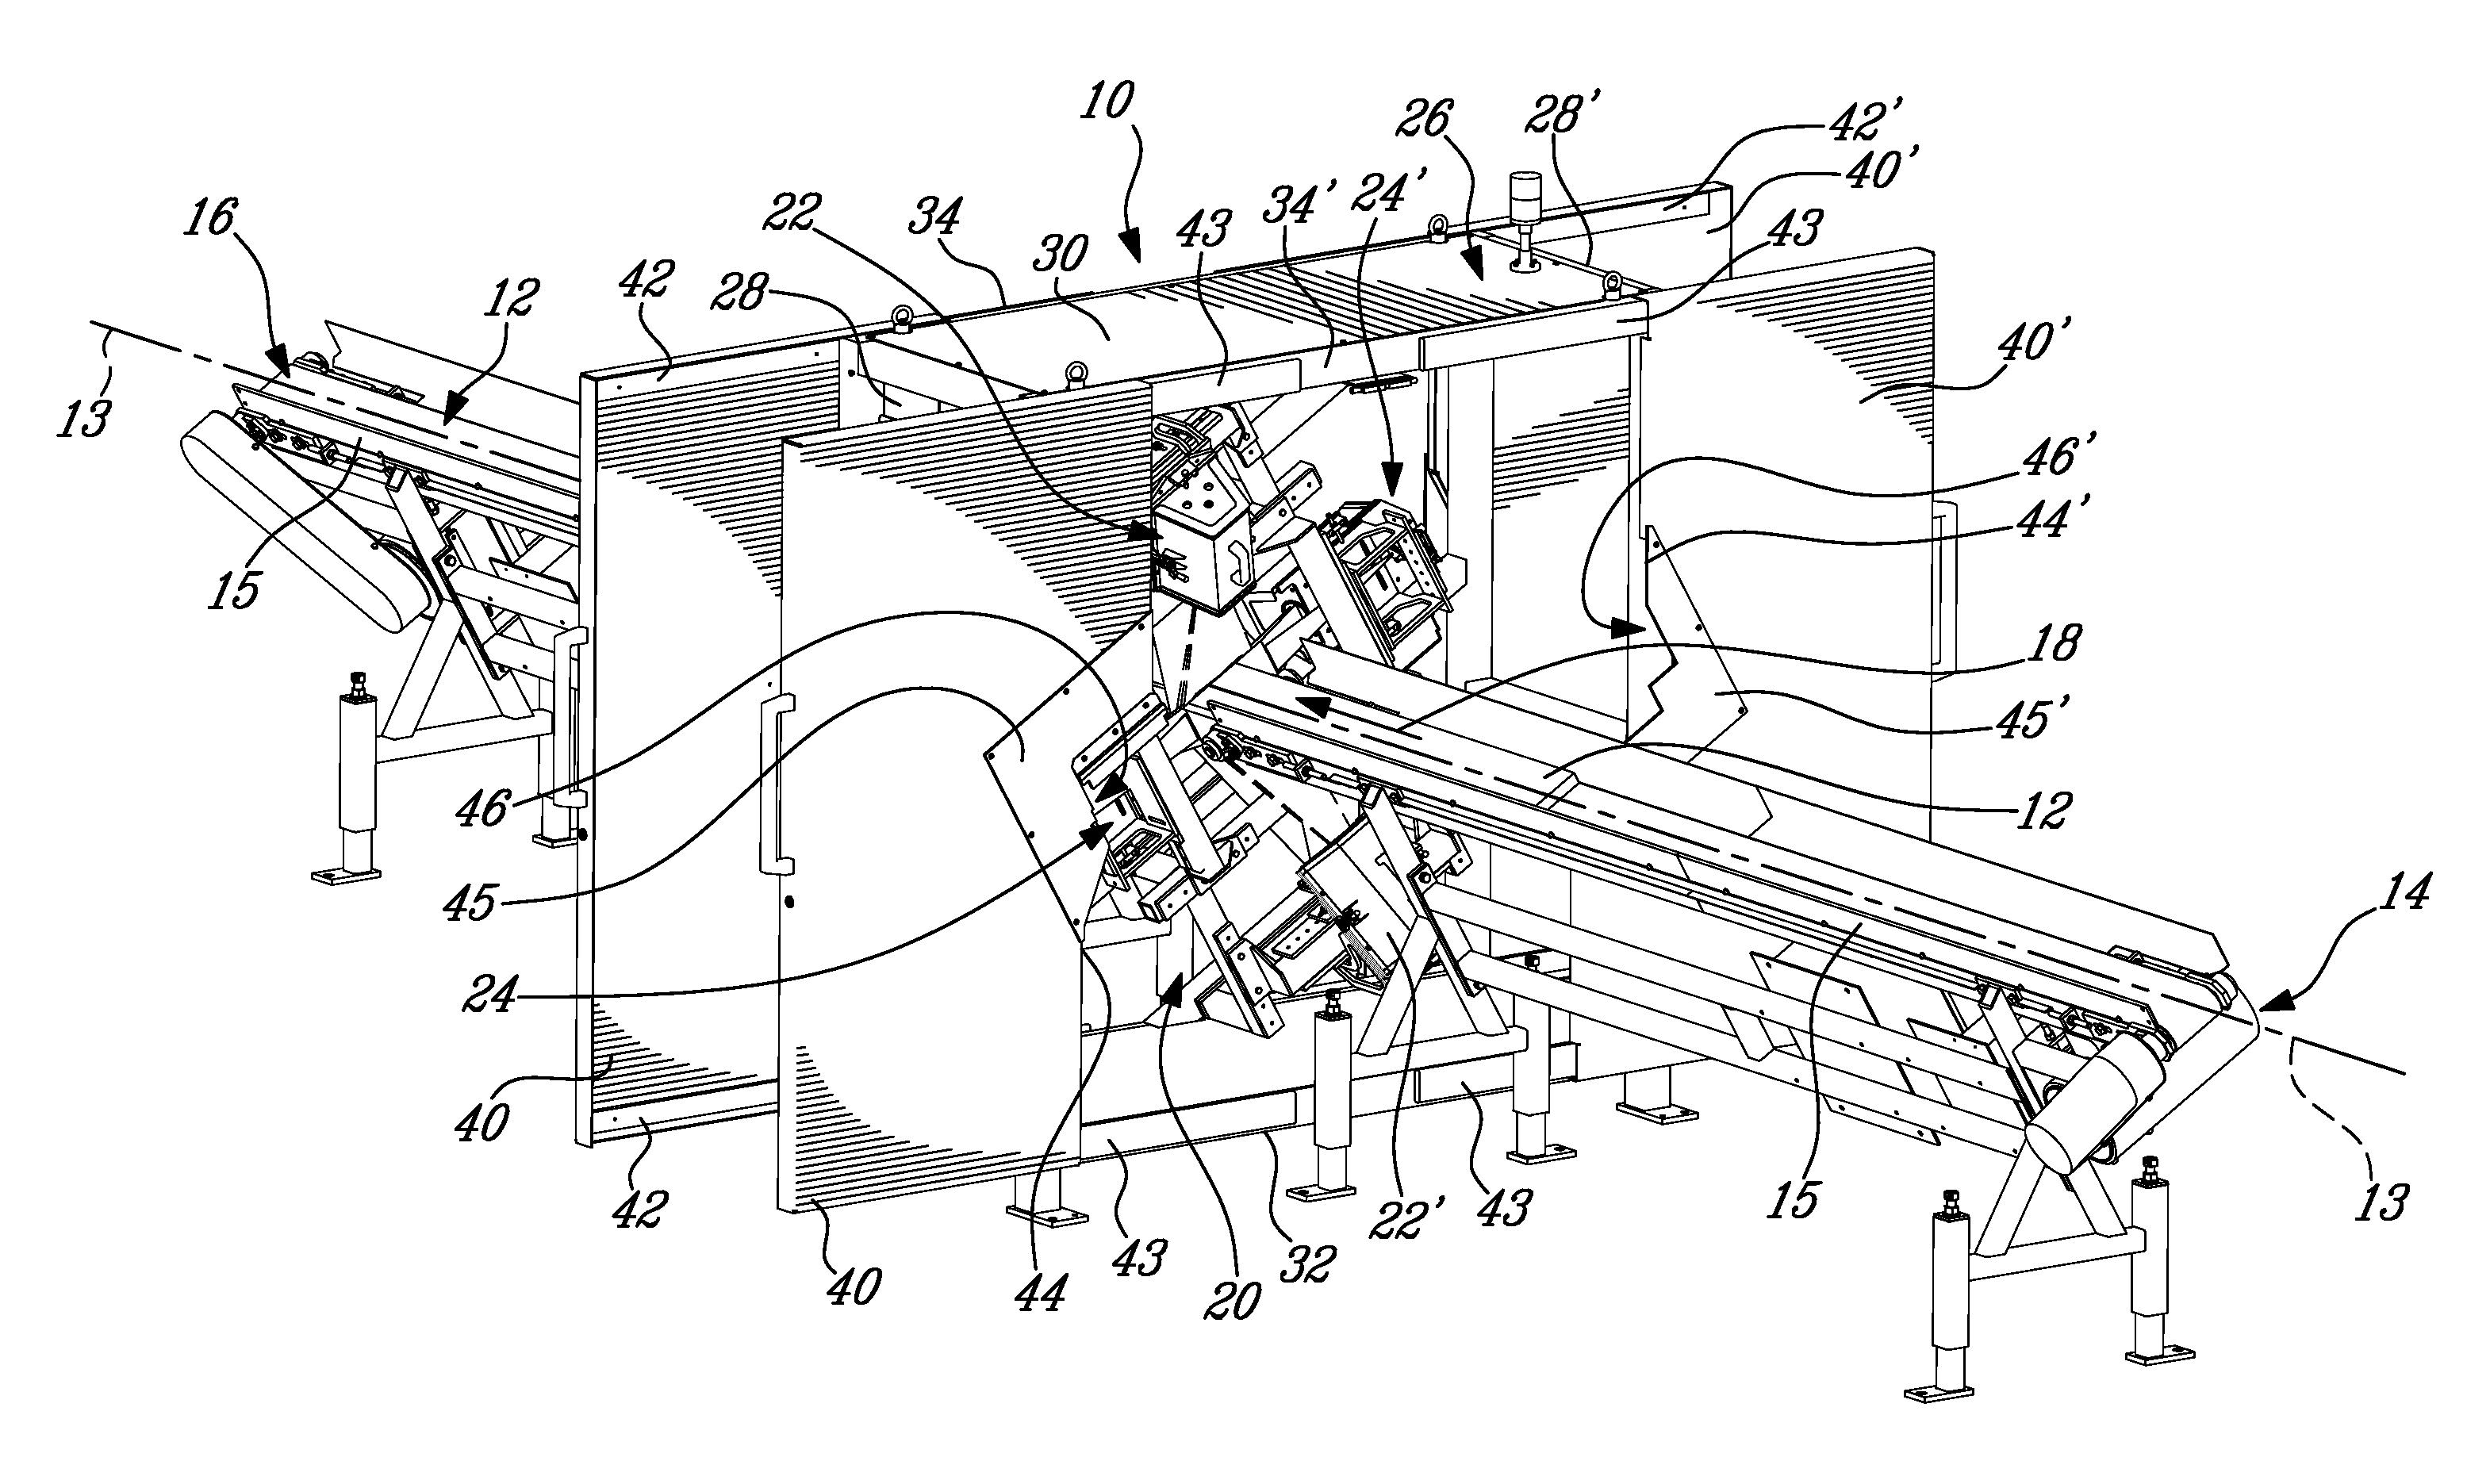 Optical inspection apparatus and method